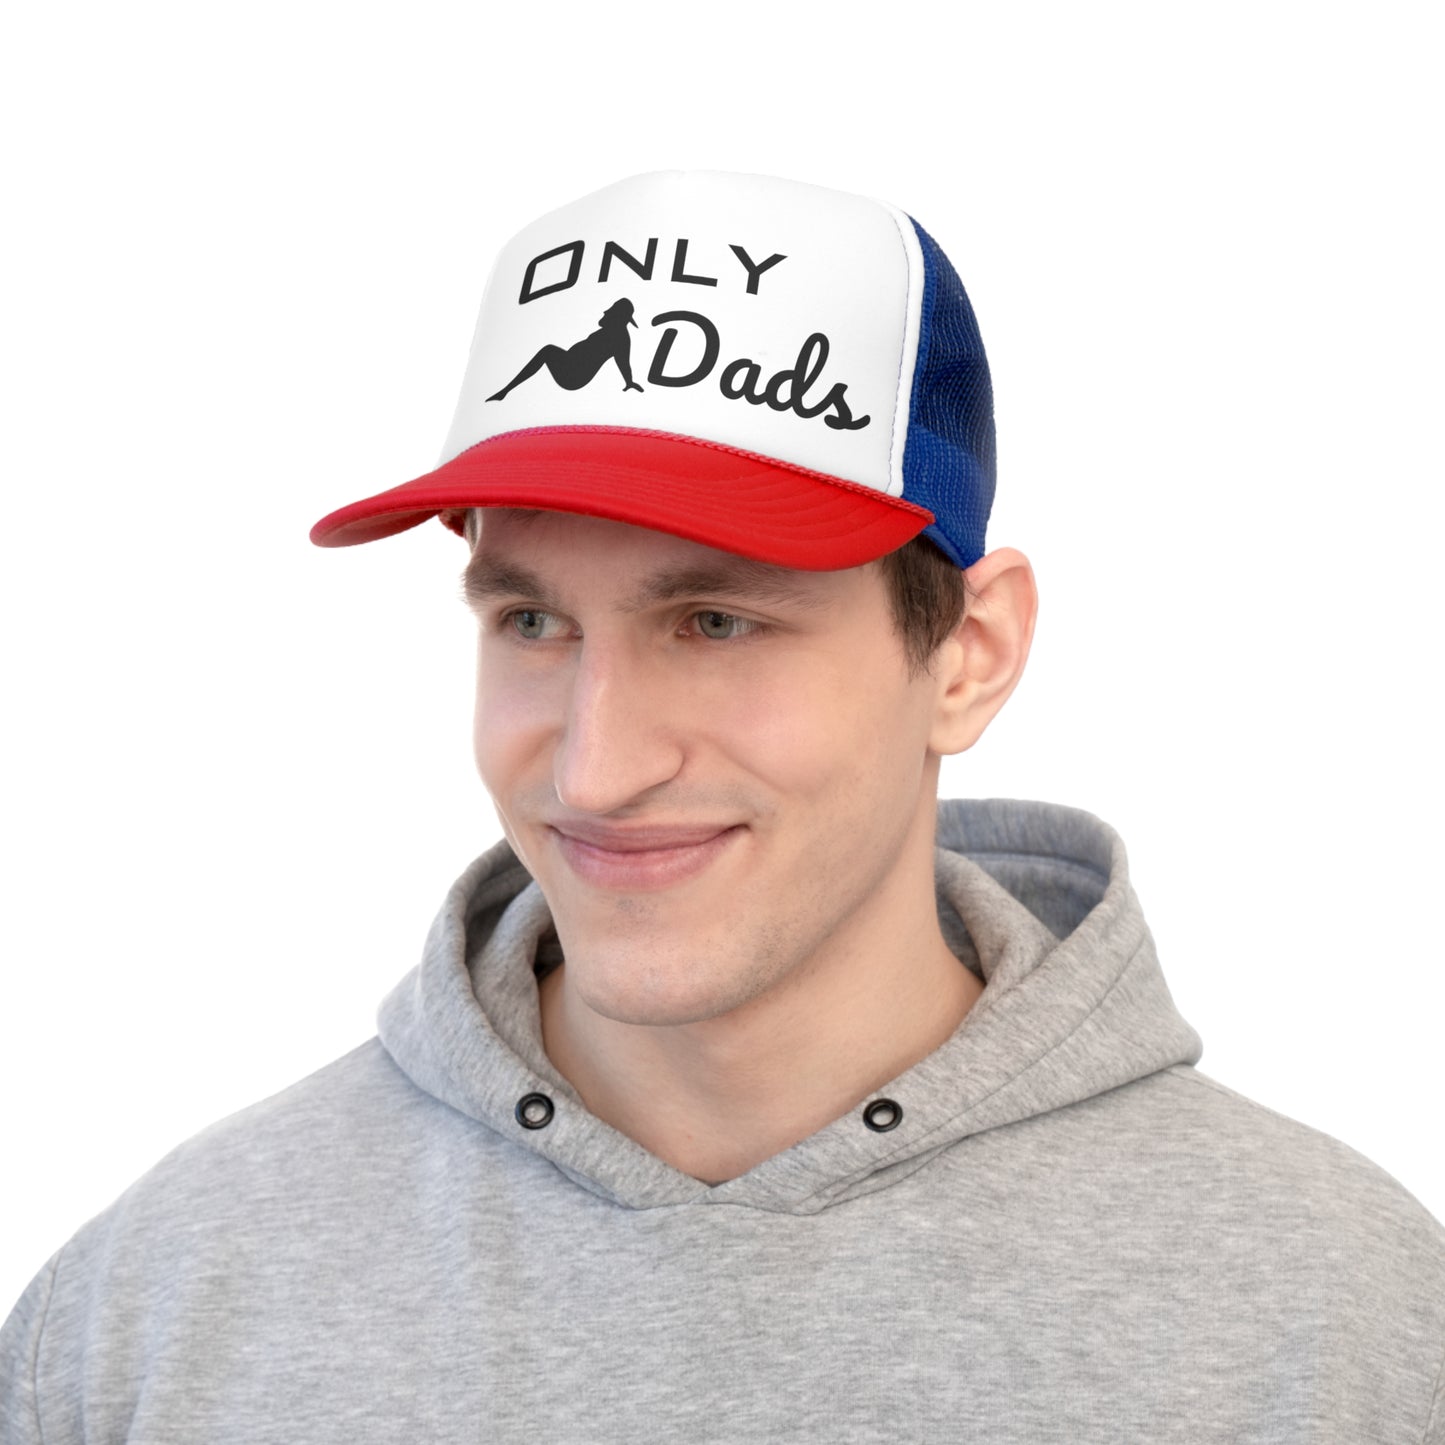 Only Dads: Hat